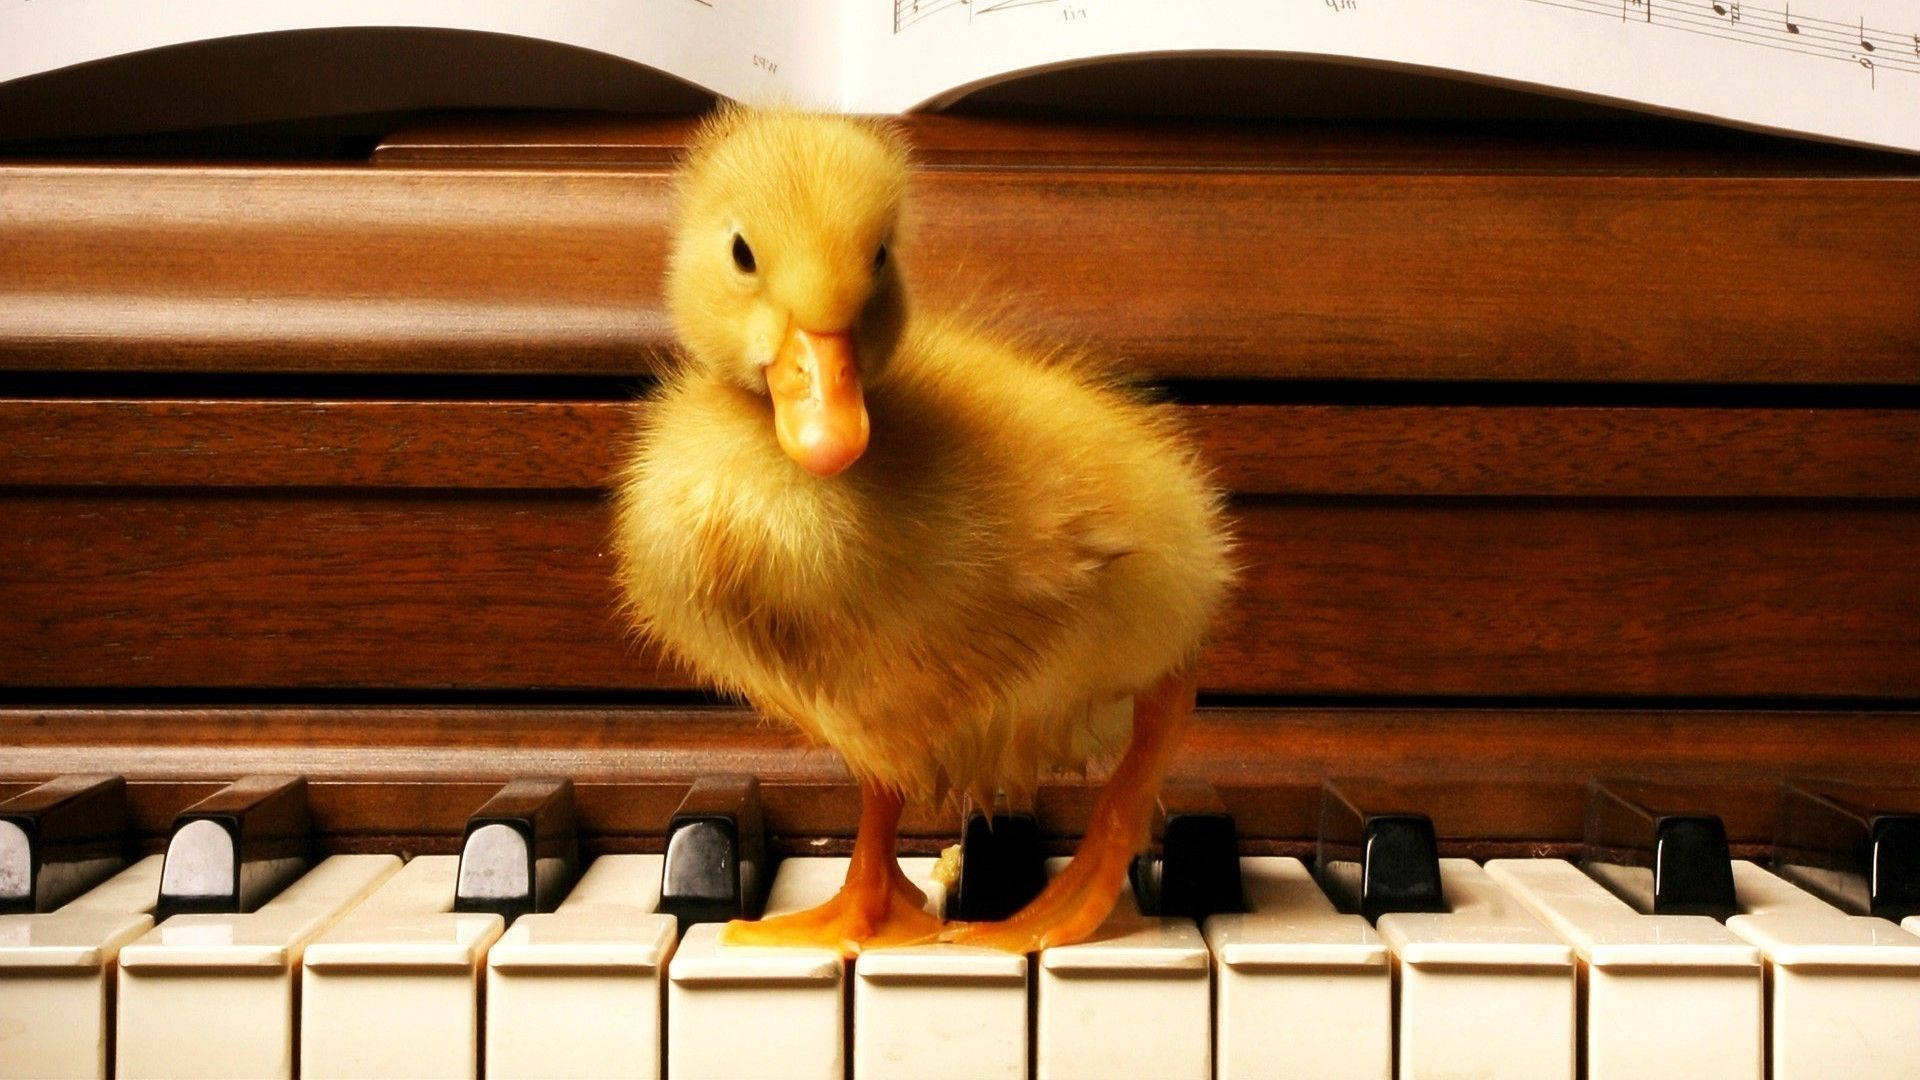 Baby Duck On Piano